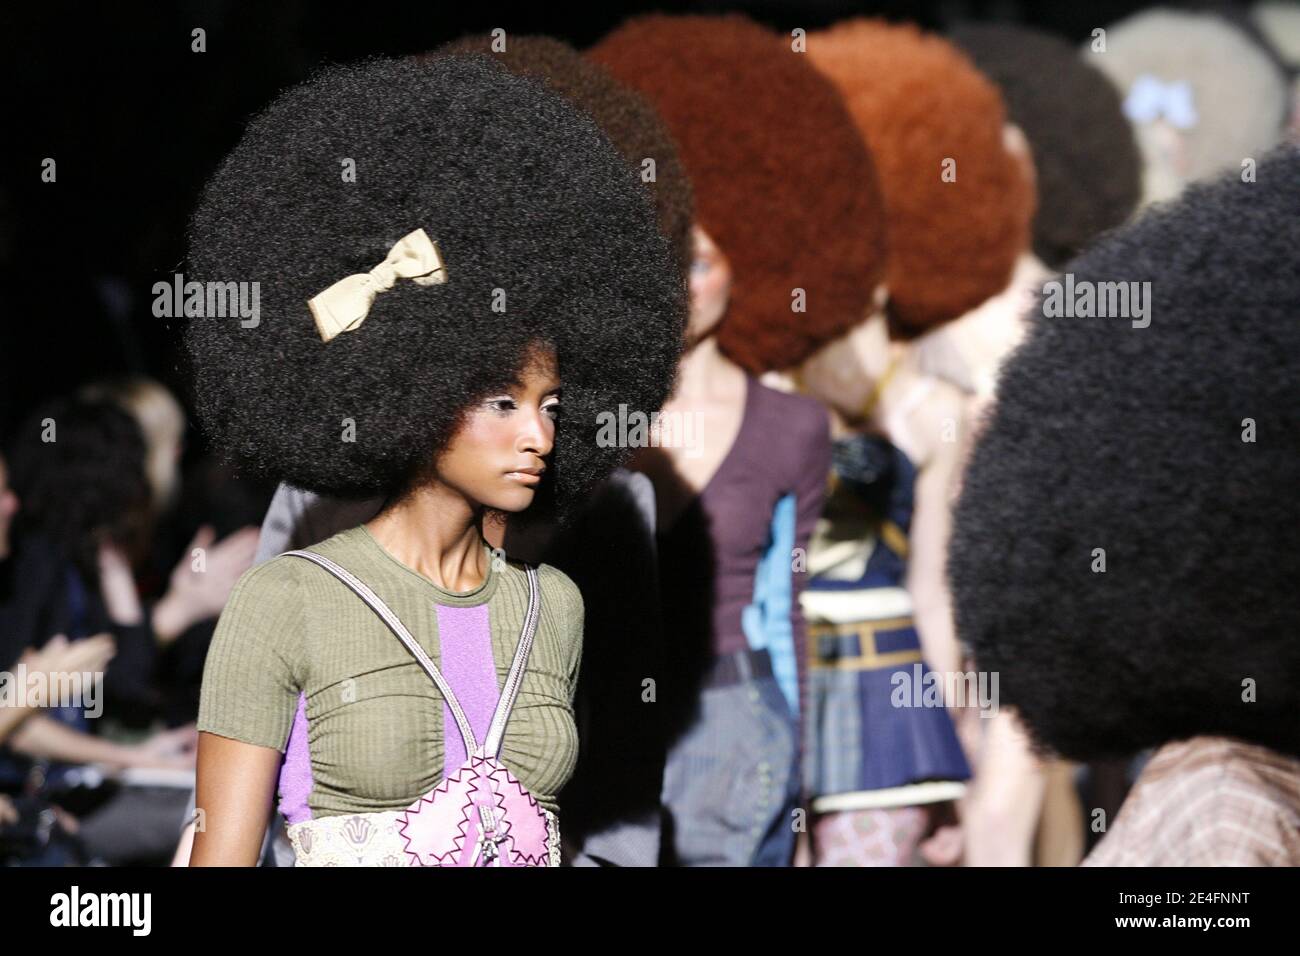 Models display creations by designer Marc Jacobs for Louis Vuitton Spring-Summer  2010 ready-to-wear collection show held at the Cour Carree du Louvre in  Paris, France, on October 7, 2009. Photo by Alain